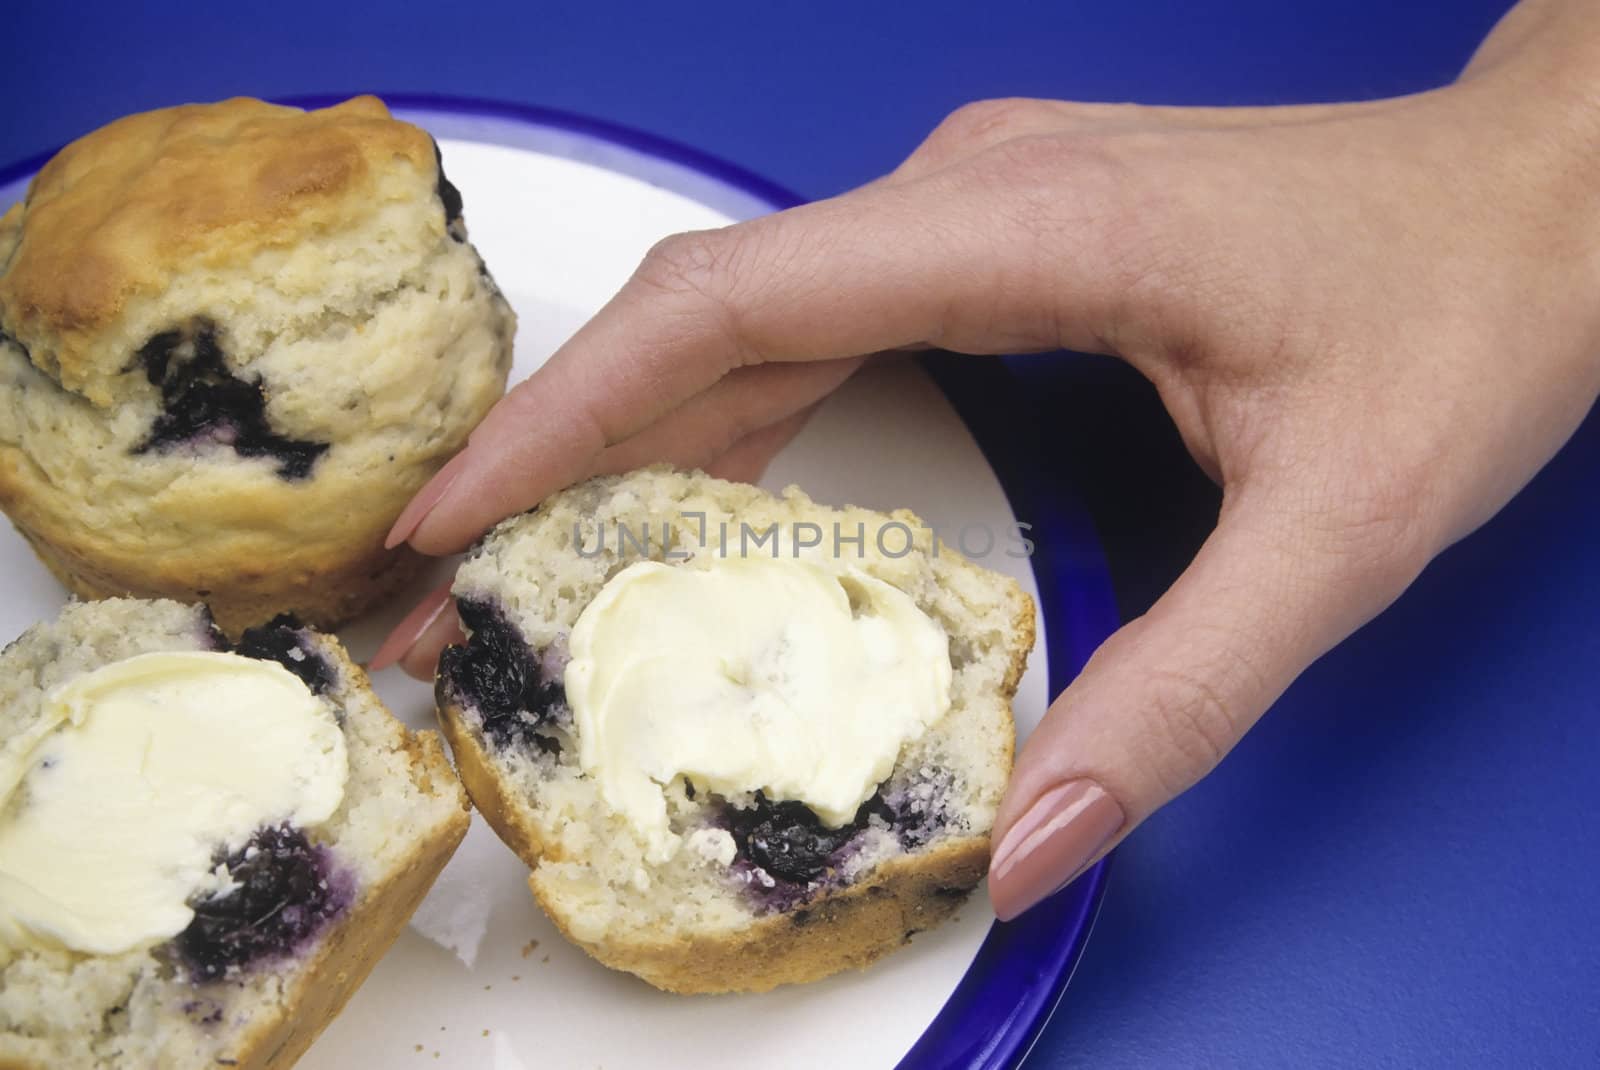 Blueberry Muffin with butter by edbockstock